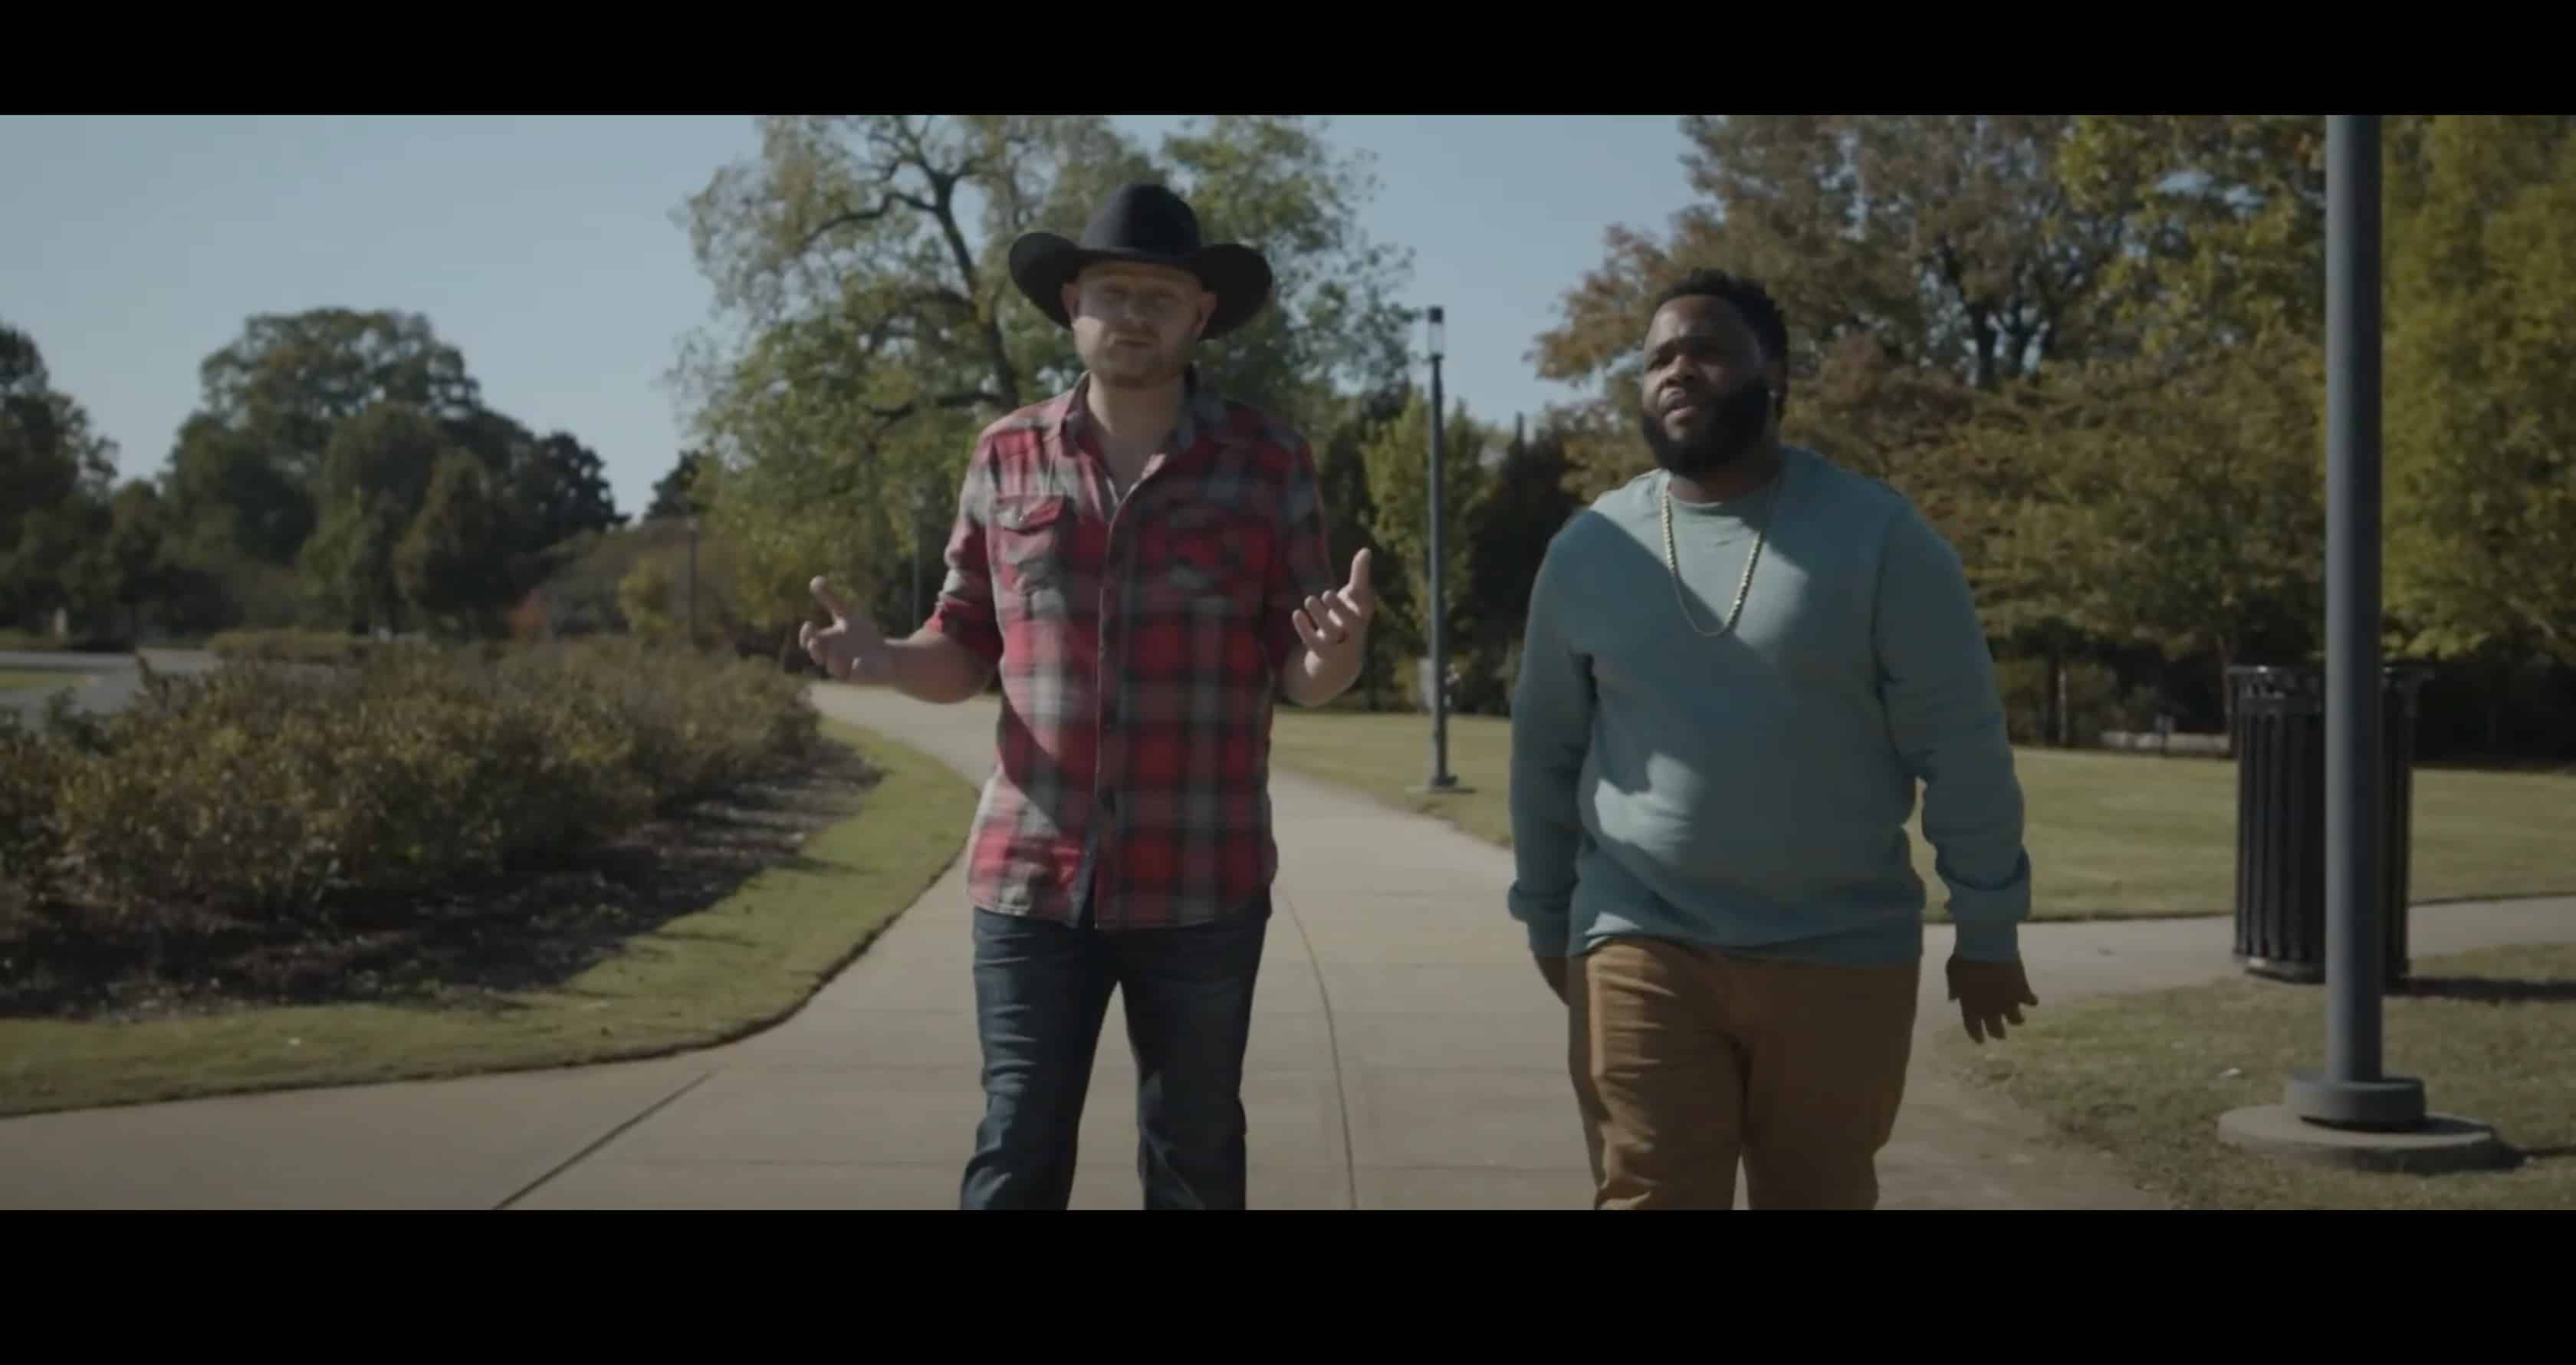 Country Singer Matt Farris Teams With ‘The Voice’ R&B Singer Darious Lyles On The Healing “We Need Love”